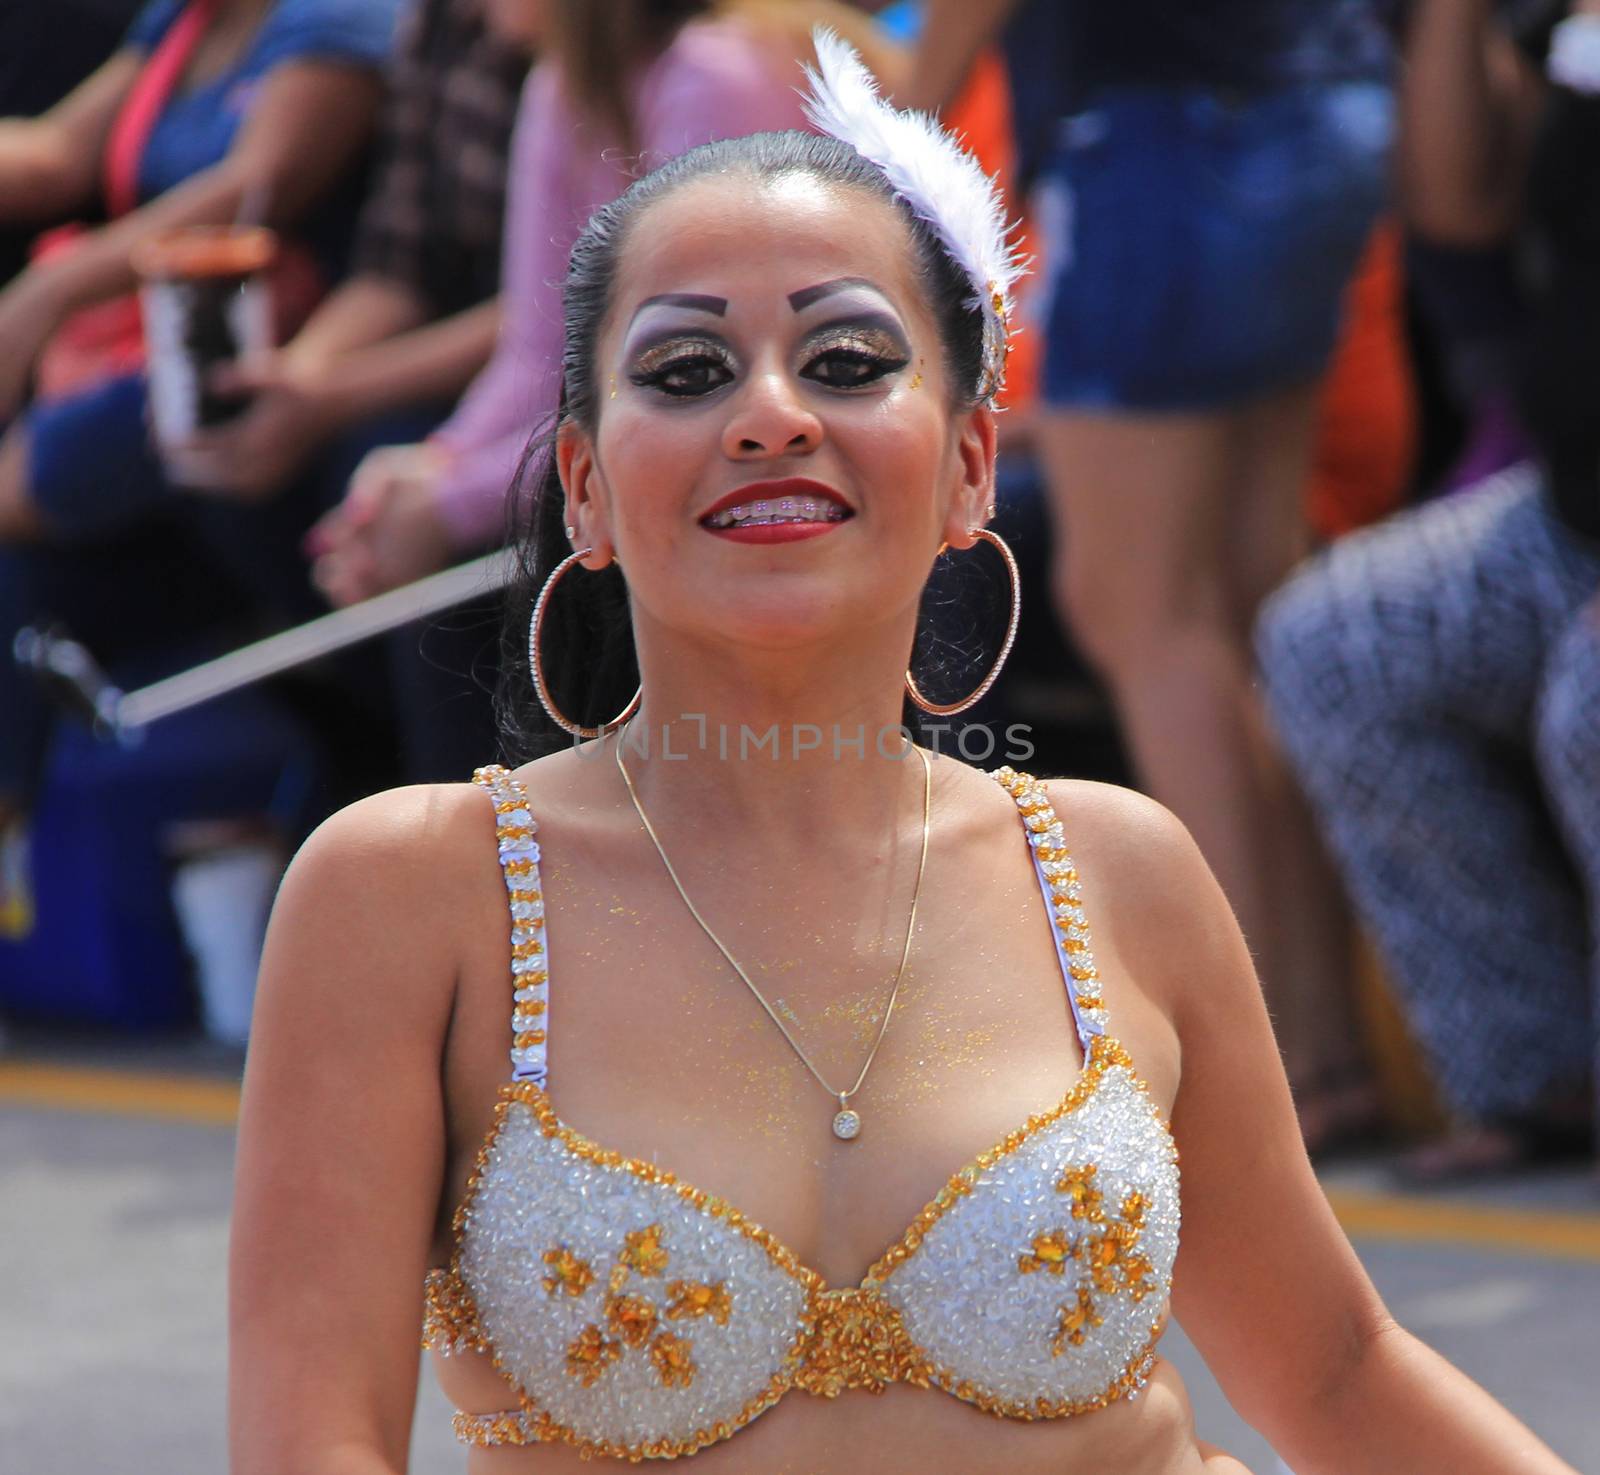 A dancer performing at a parade during a carnaval in Veracruz, Mexico 07 Feb 2016 No model release Editorial use only